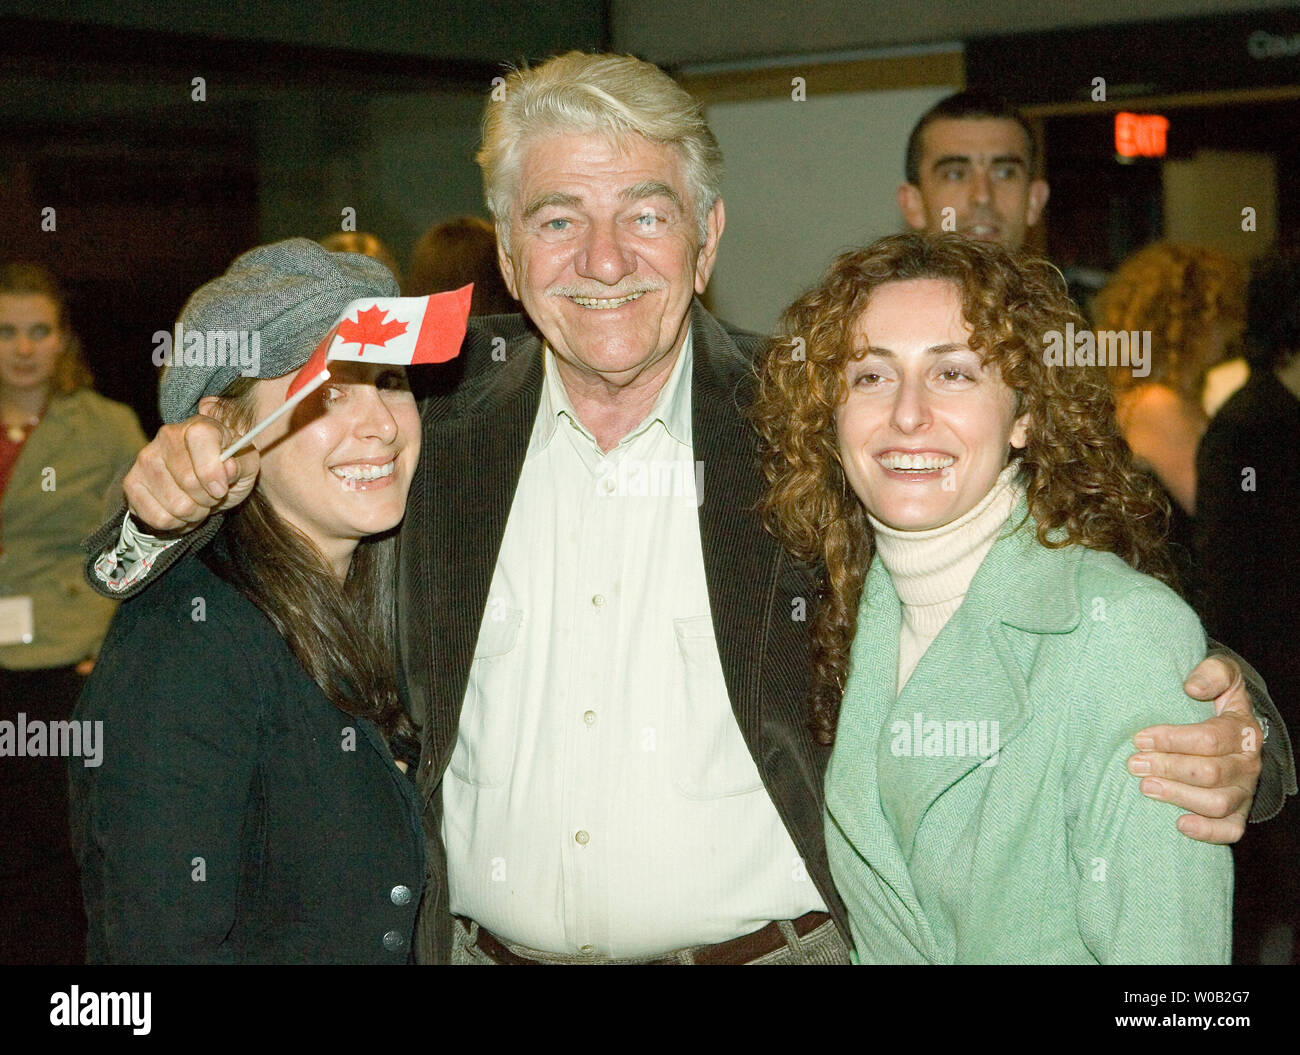 Actors Jenny Albano (L) and Seymour Cassel and director Alexandra Brodsky (R) arrive for the anniversary gala of the Vancouver International Film Festival in Vancouver, British Columbia, October 8, 2005. Friends and co-writers, Albano and Brodsky talked Cassel into starring in their John Cassavetes influenced film 'Bittersweet Place' (USA) which is screening at the festival.  (UPI Photo/Heinz Ruckemann) Stock Photo